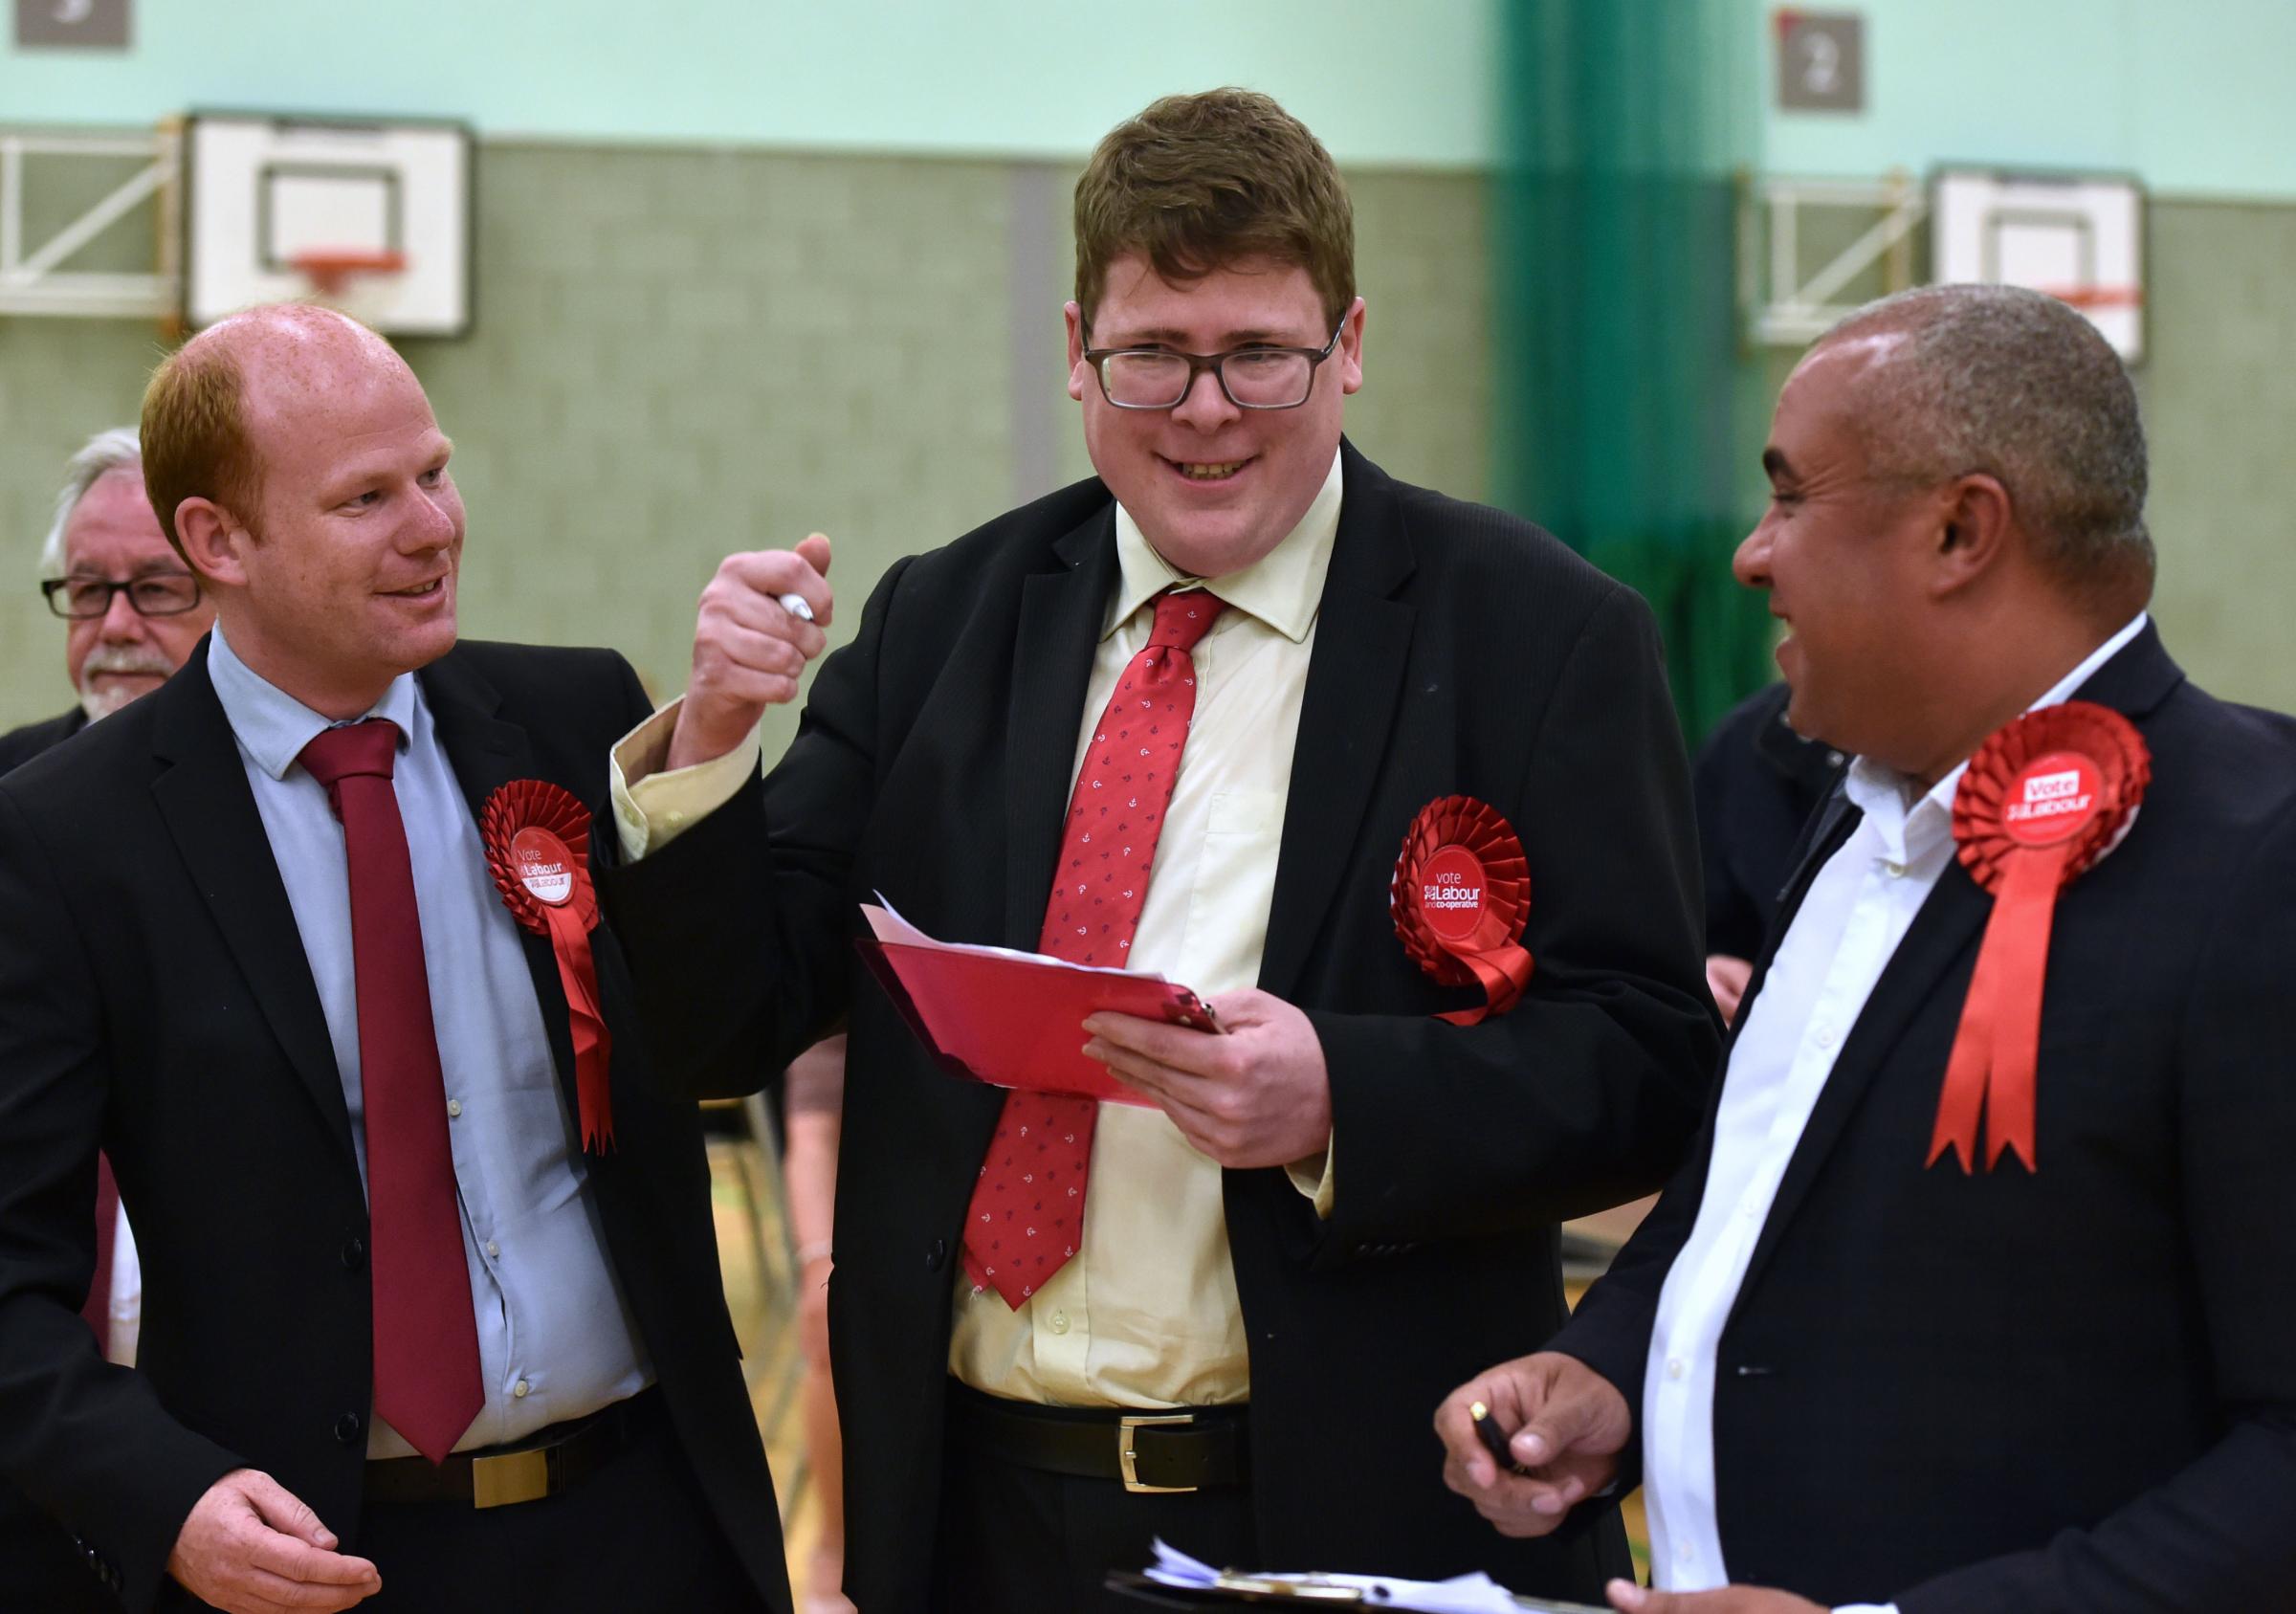 Labour candidate David Kirkman (centre) reacts after taking the Fryerns Ward. Pic: PA